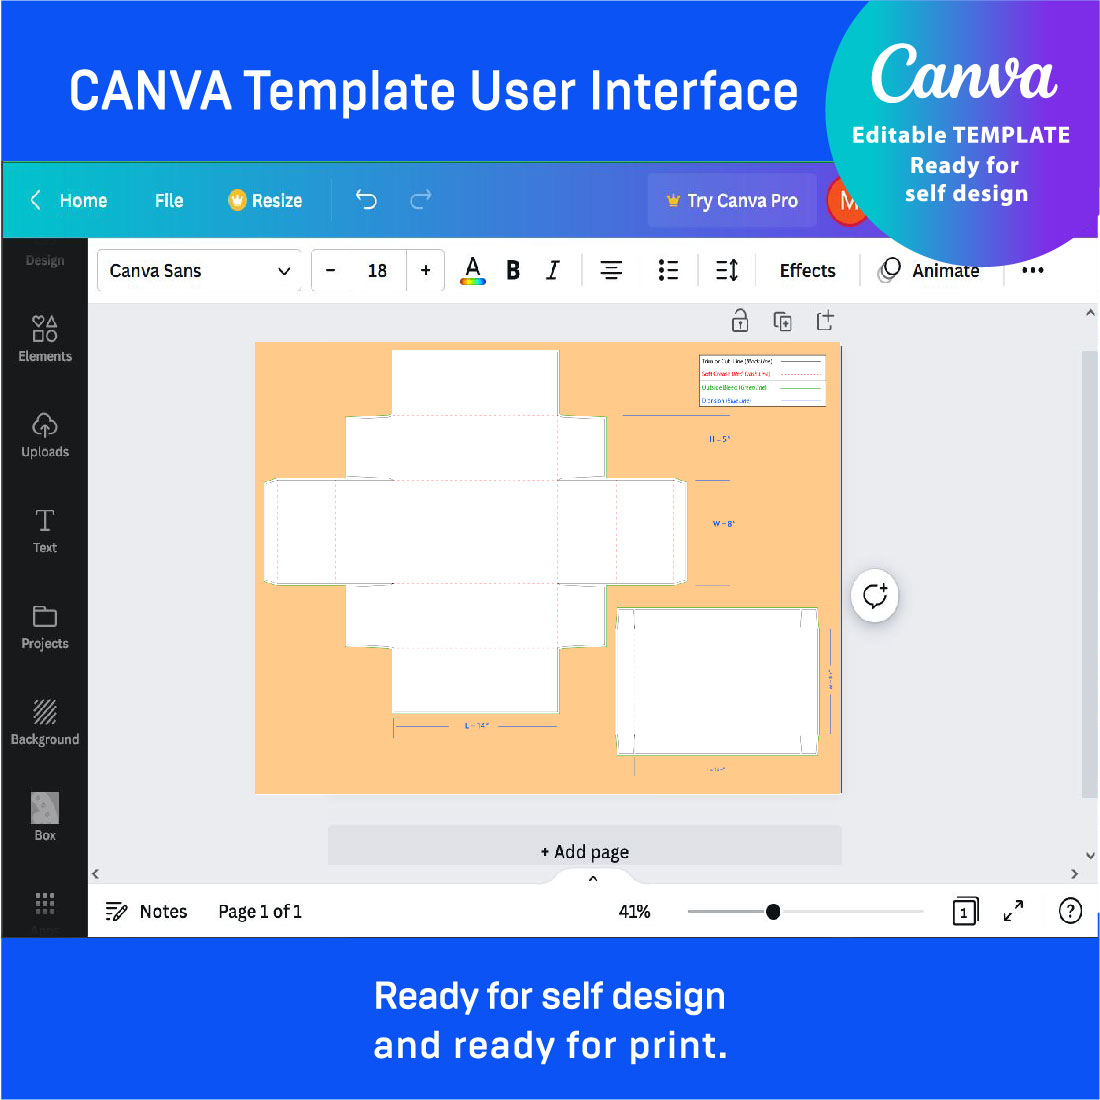 The canva template user interface.